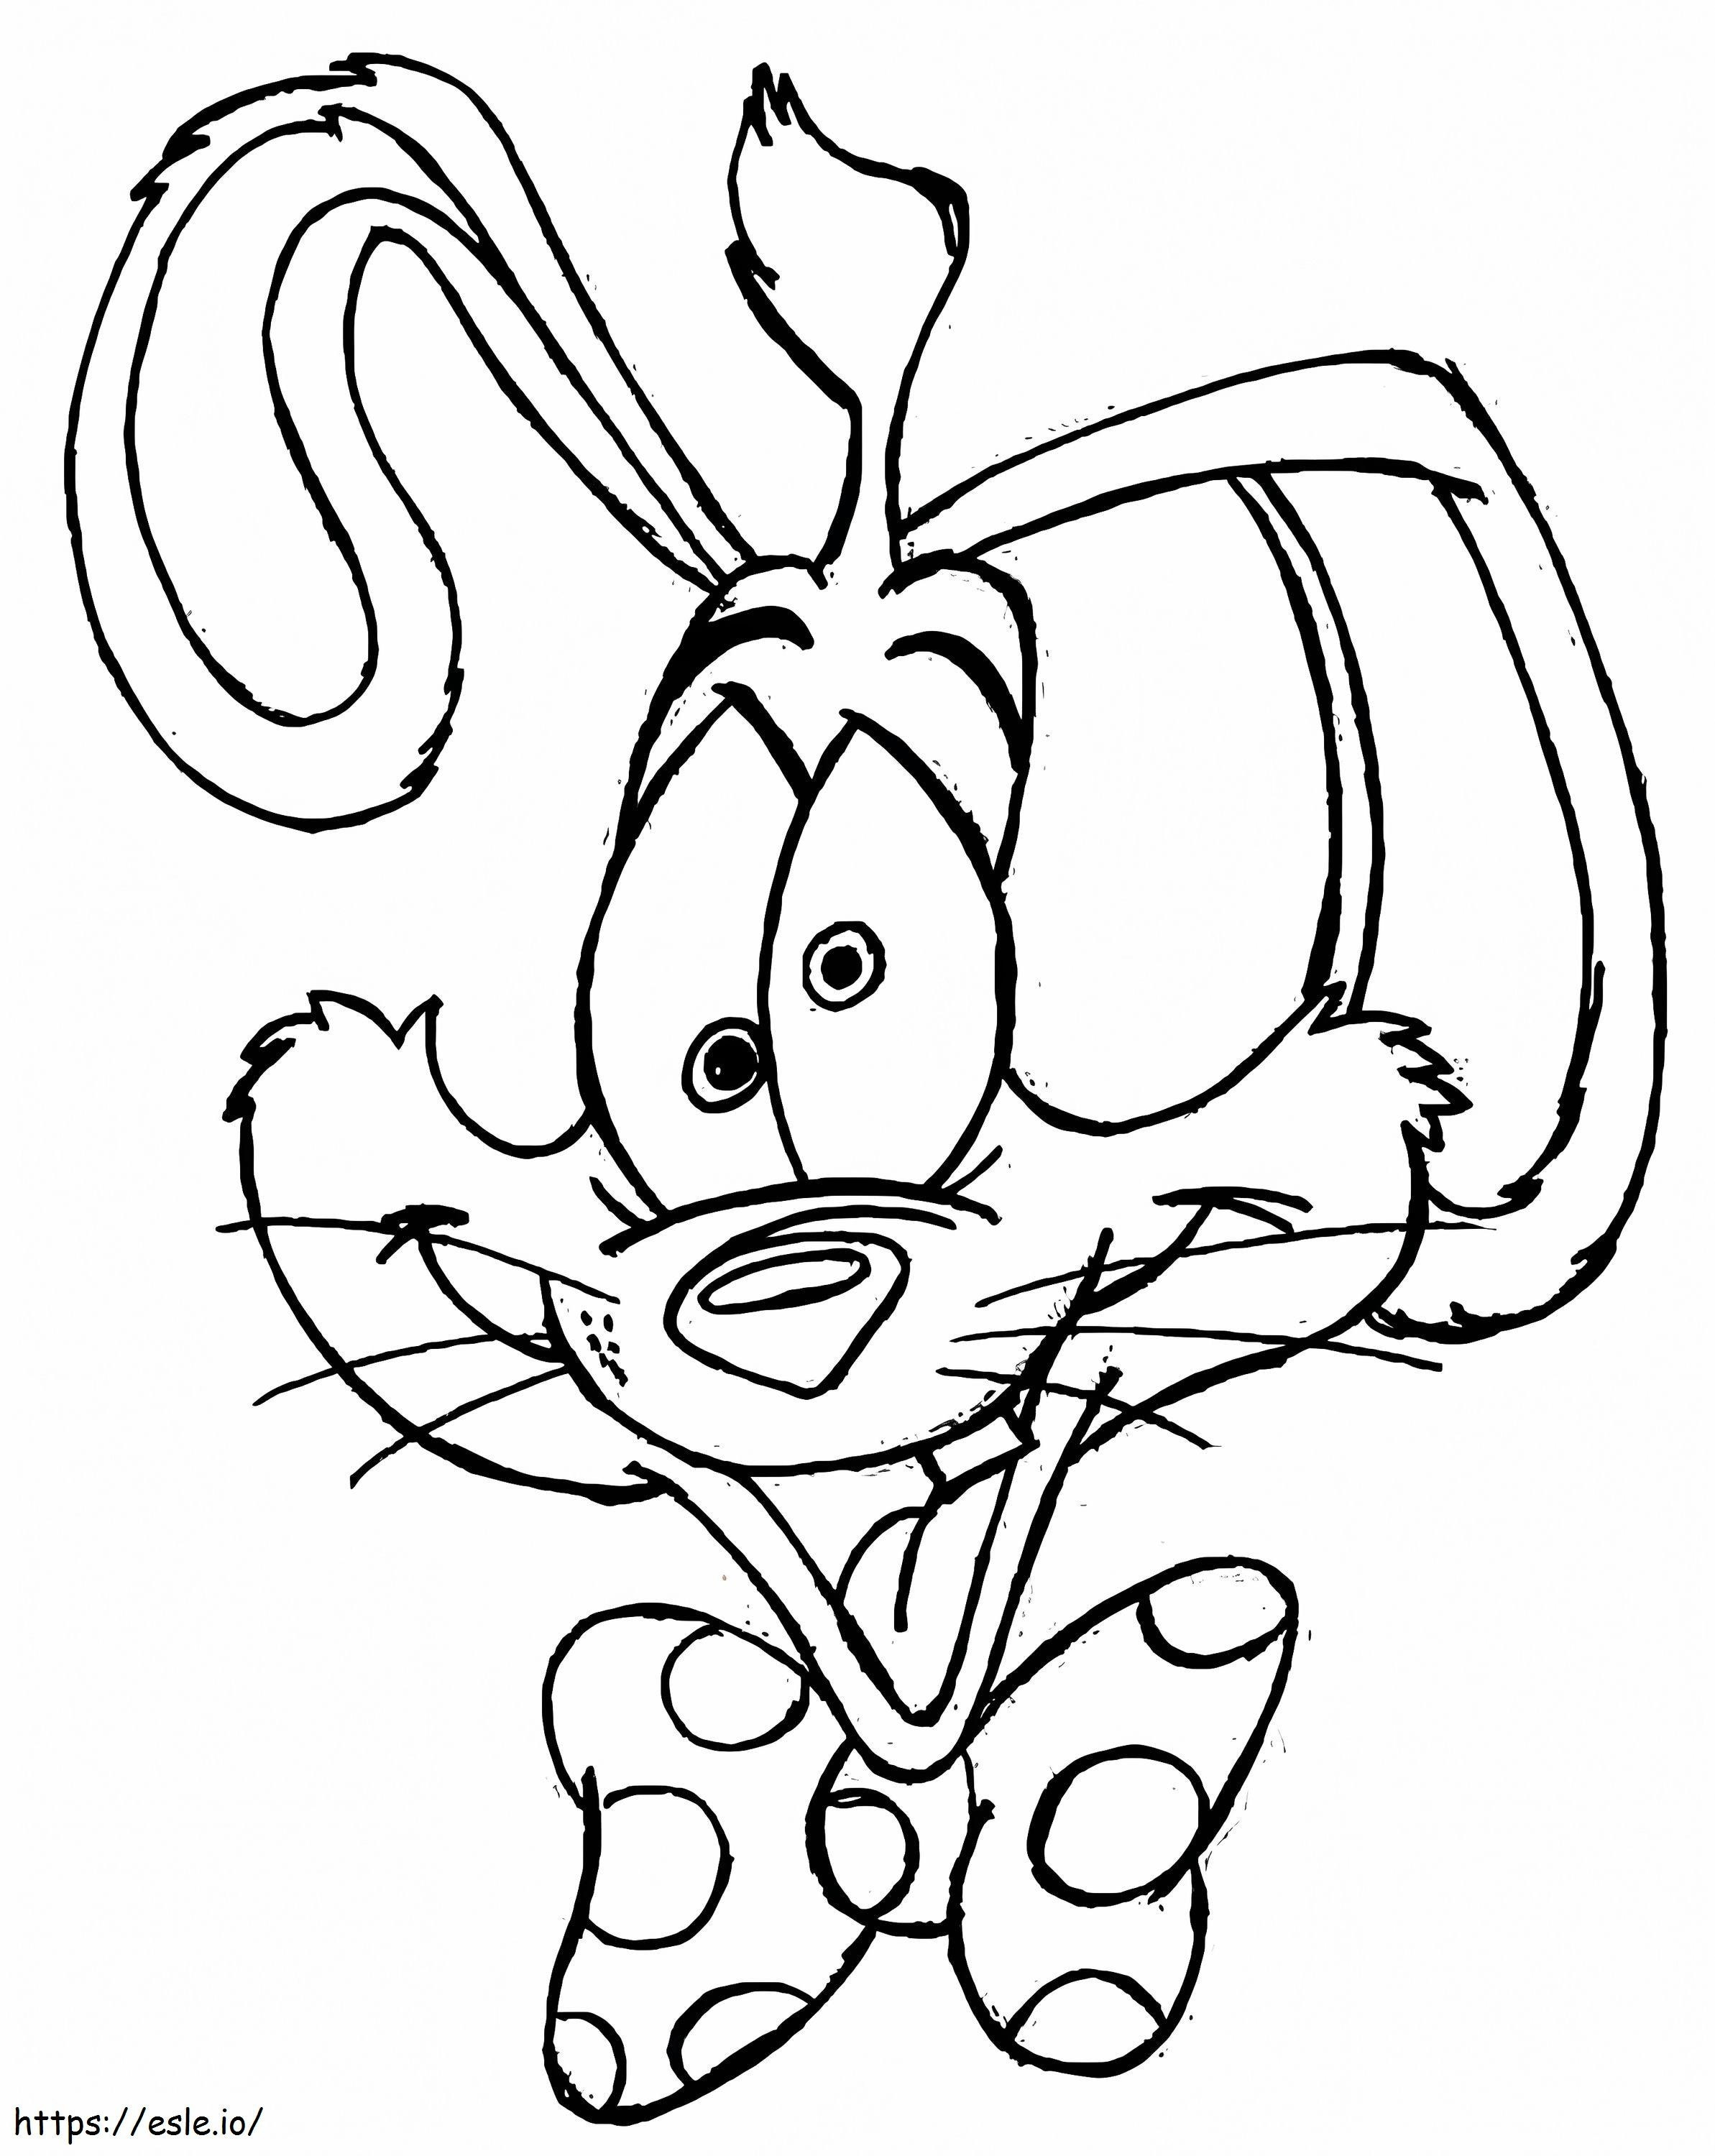 Crazy Roger Rabbit coloring page